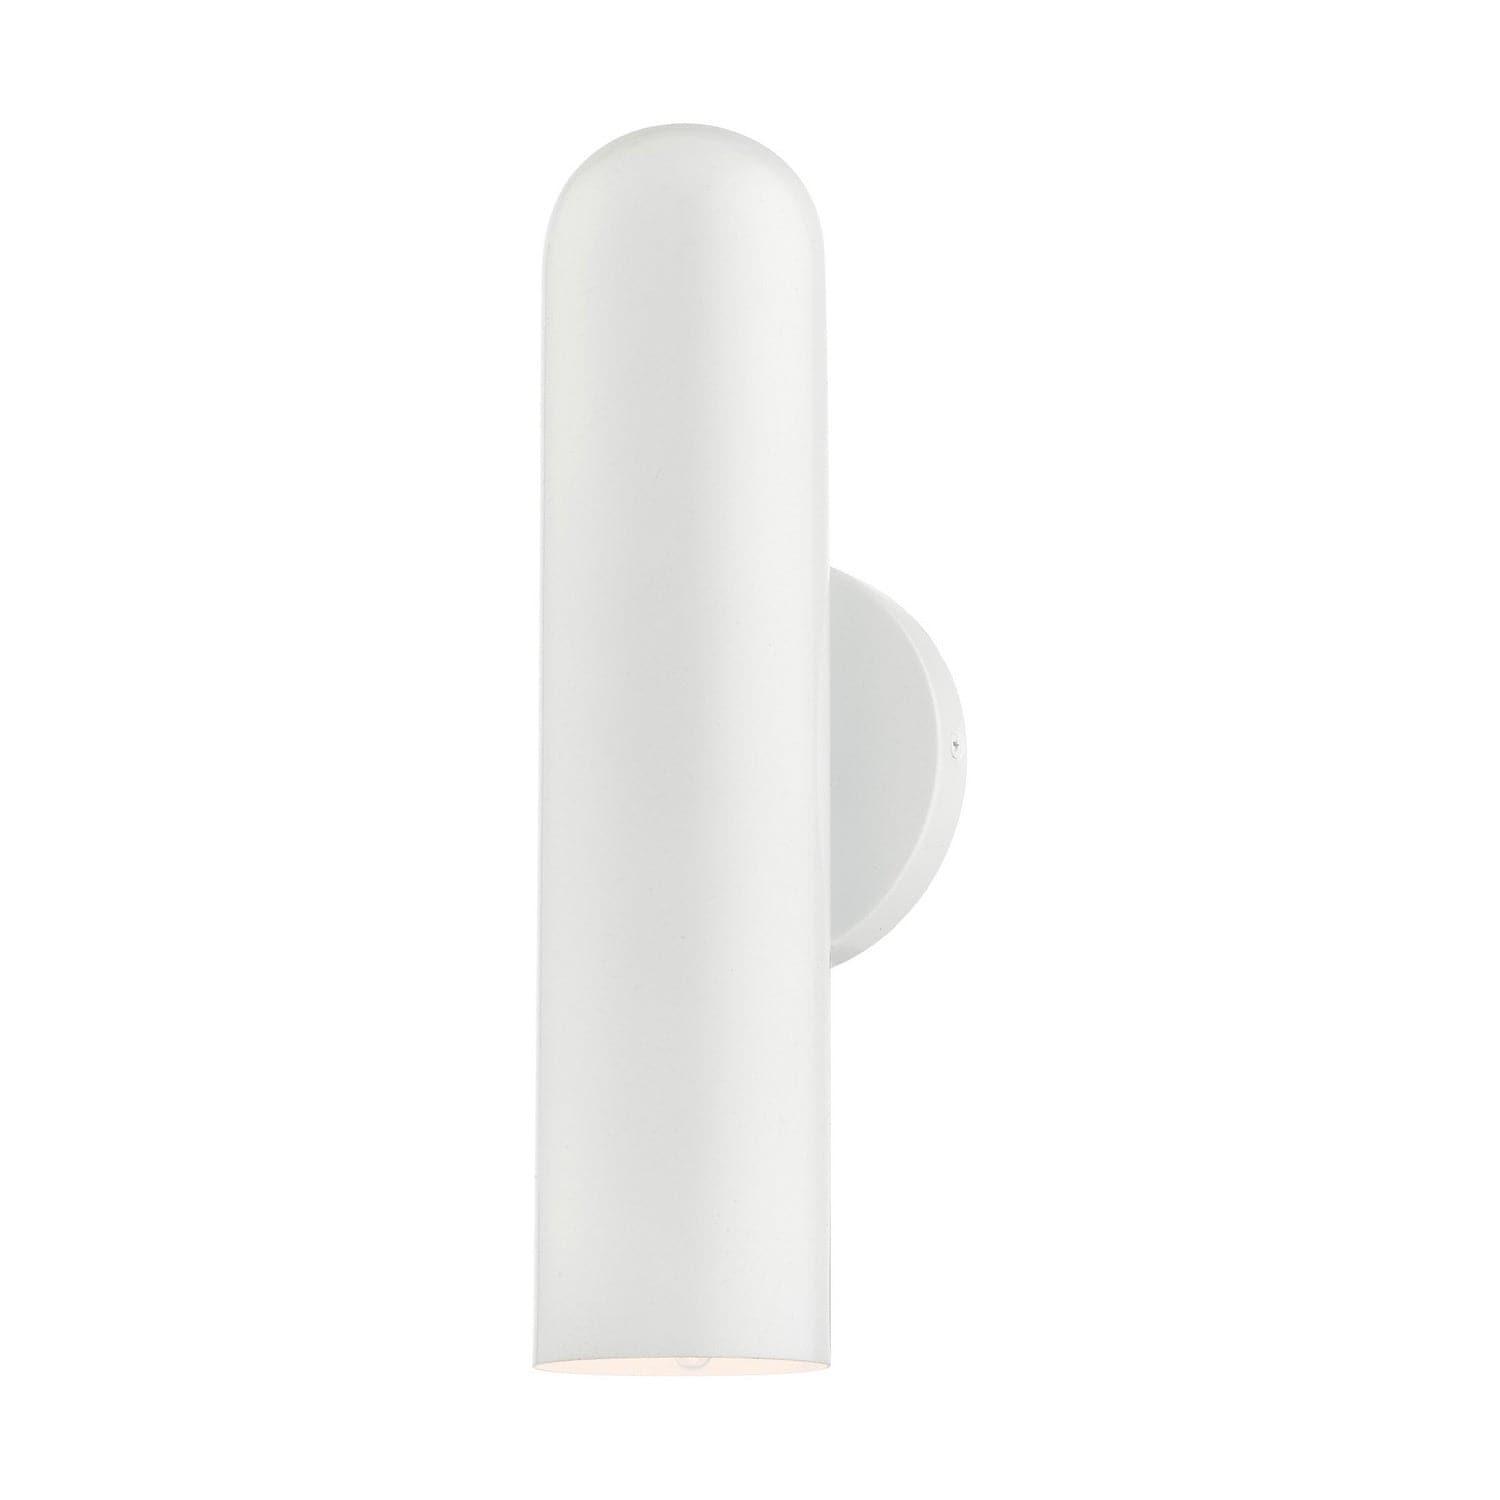 Livex Lighting - 46750-69 - One Light Wall Sconce - Ardmore - Shiny White